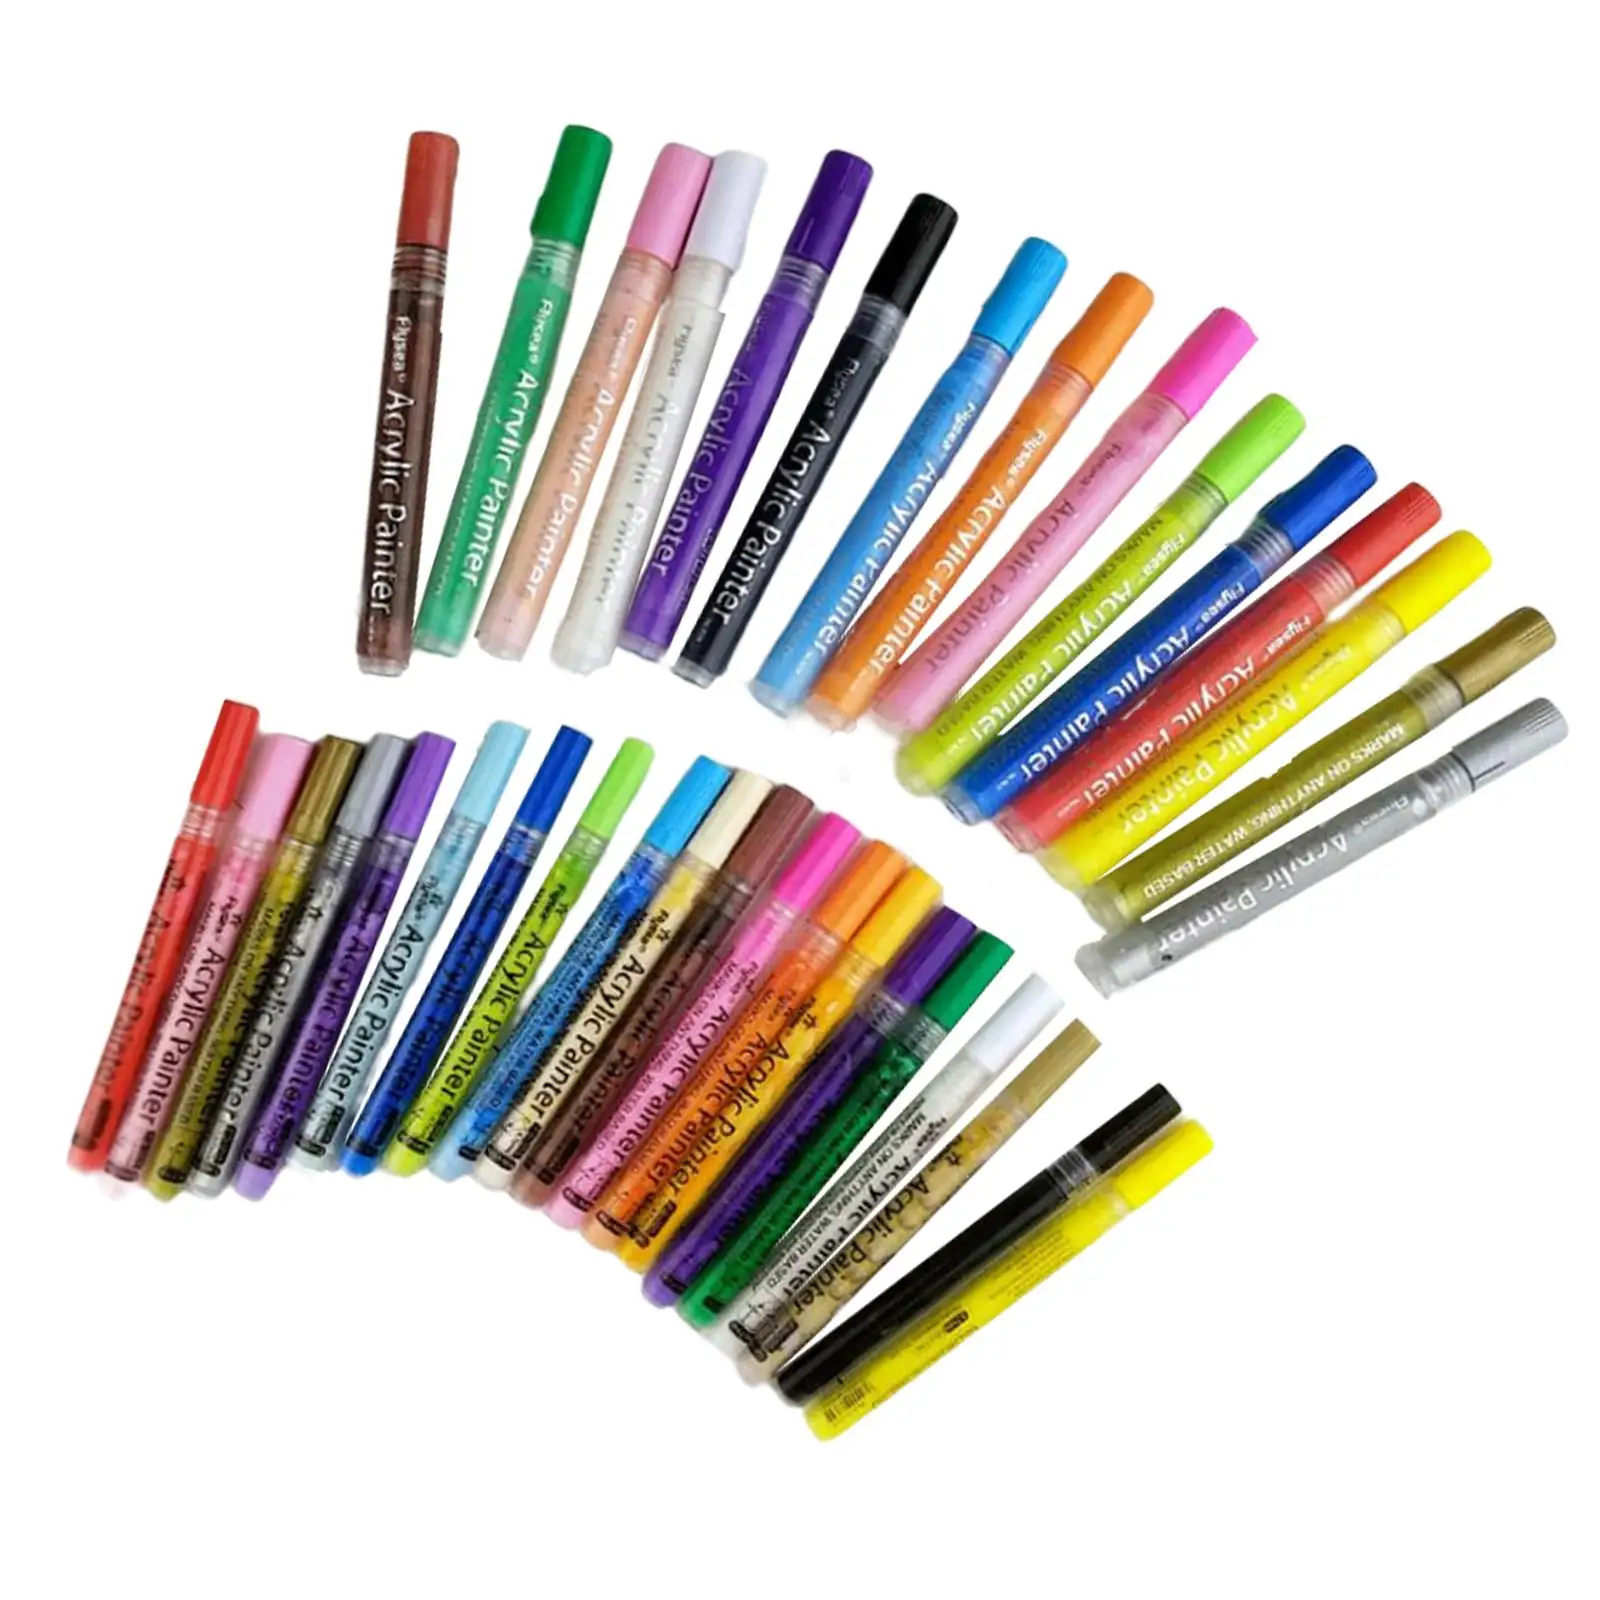 Acrylic Paint Pens Water Based Ink 3.0mm&0.7mm Tip for Rock Fabric Painting